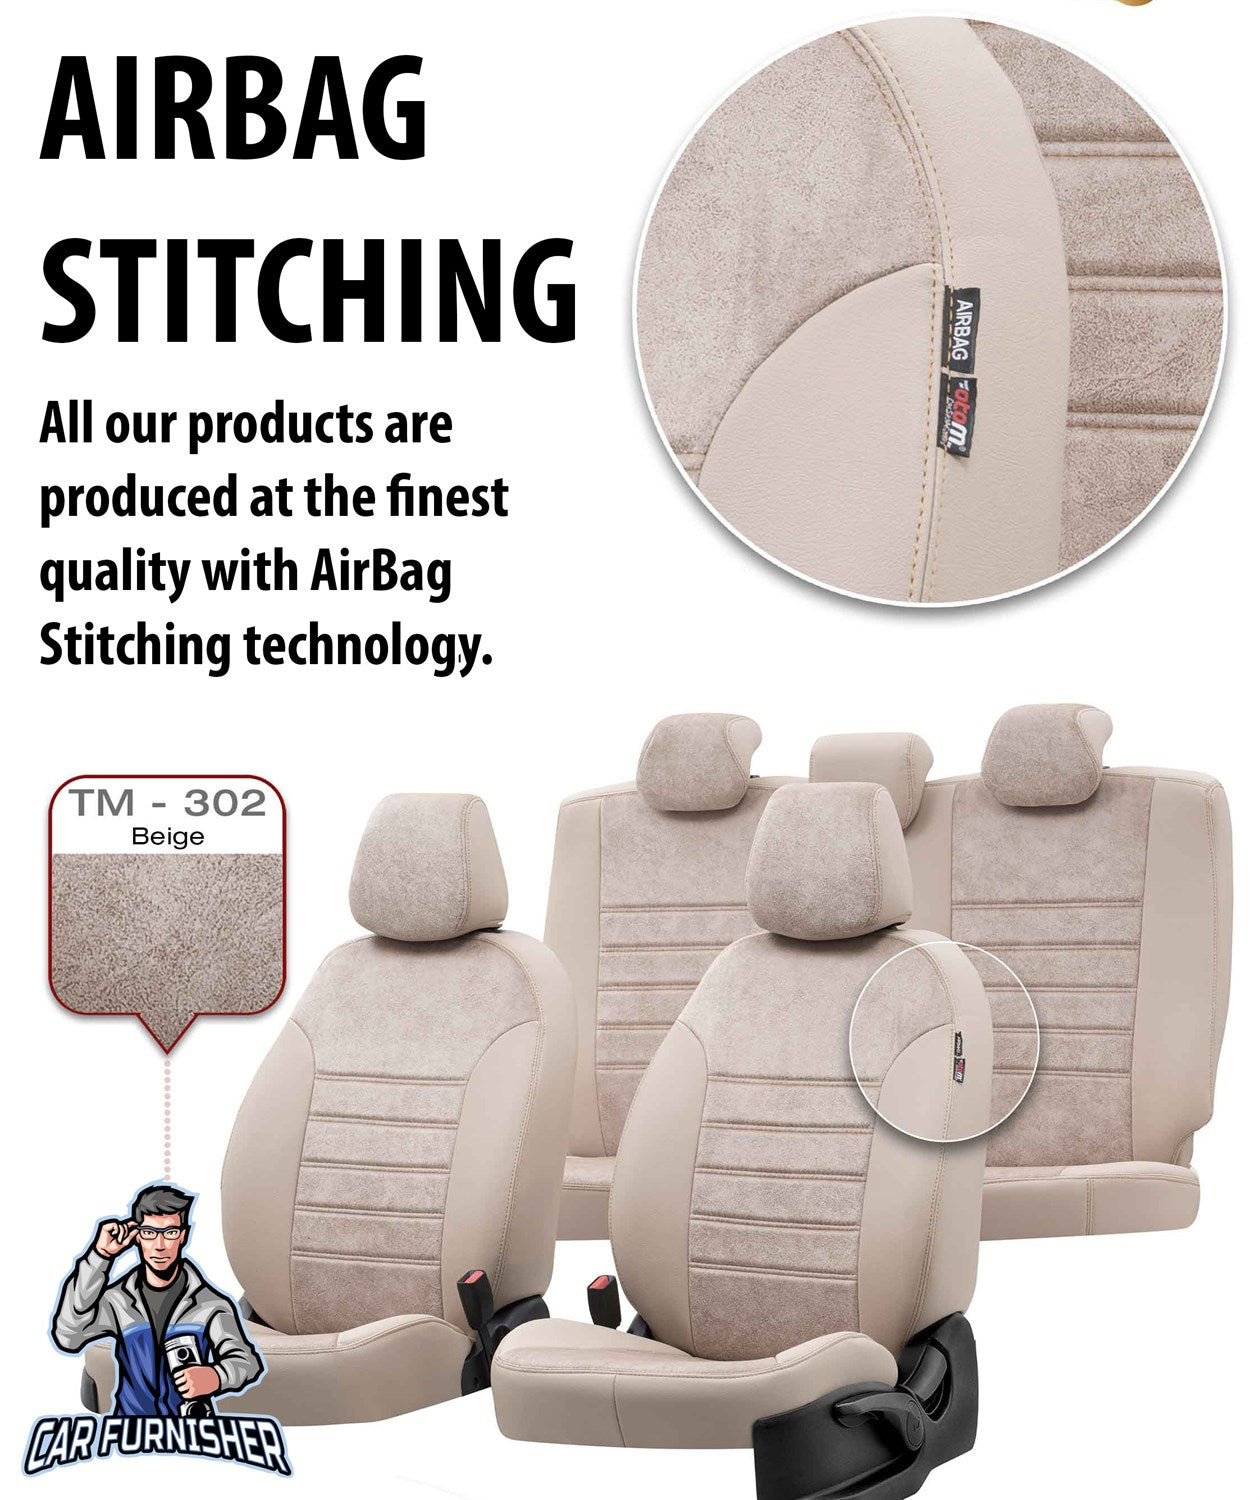 Peugeot 108 Seat Cover Milano Suede Design Ivory Leather & Suede Fabric